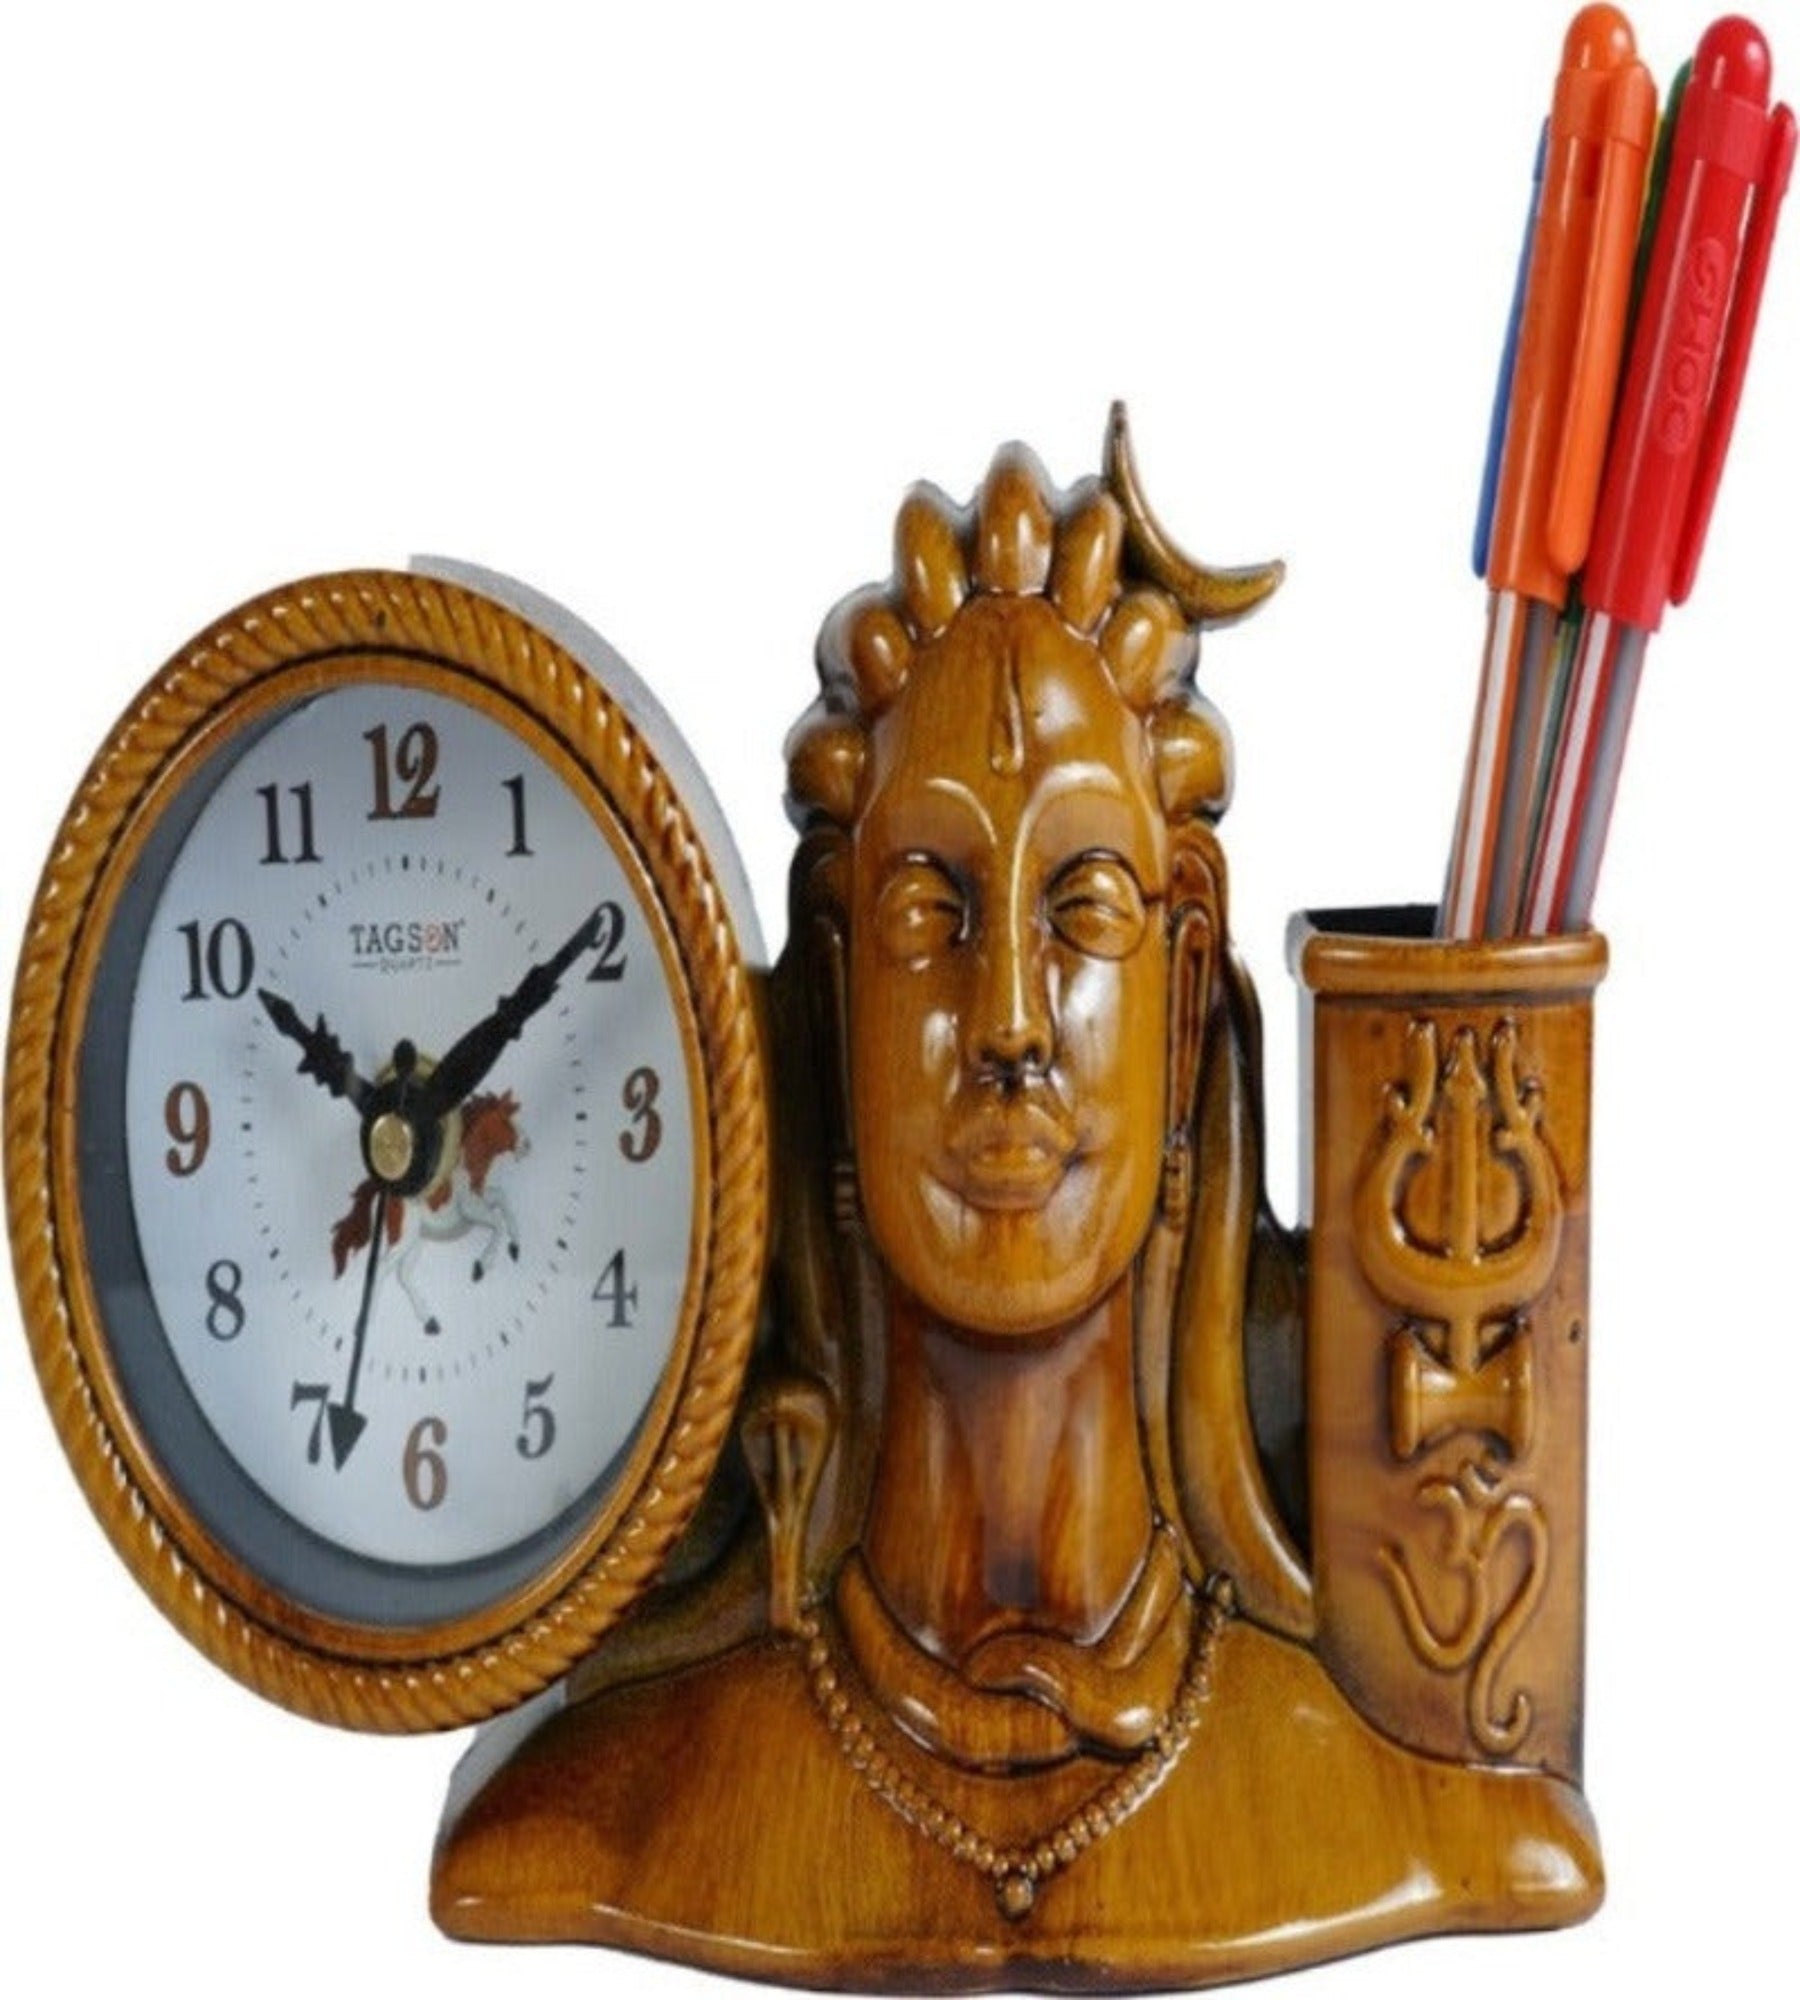 18x11 Cm Adiyogi Table Clock With Penstand For Home Office College K4187